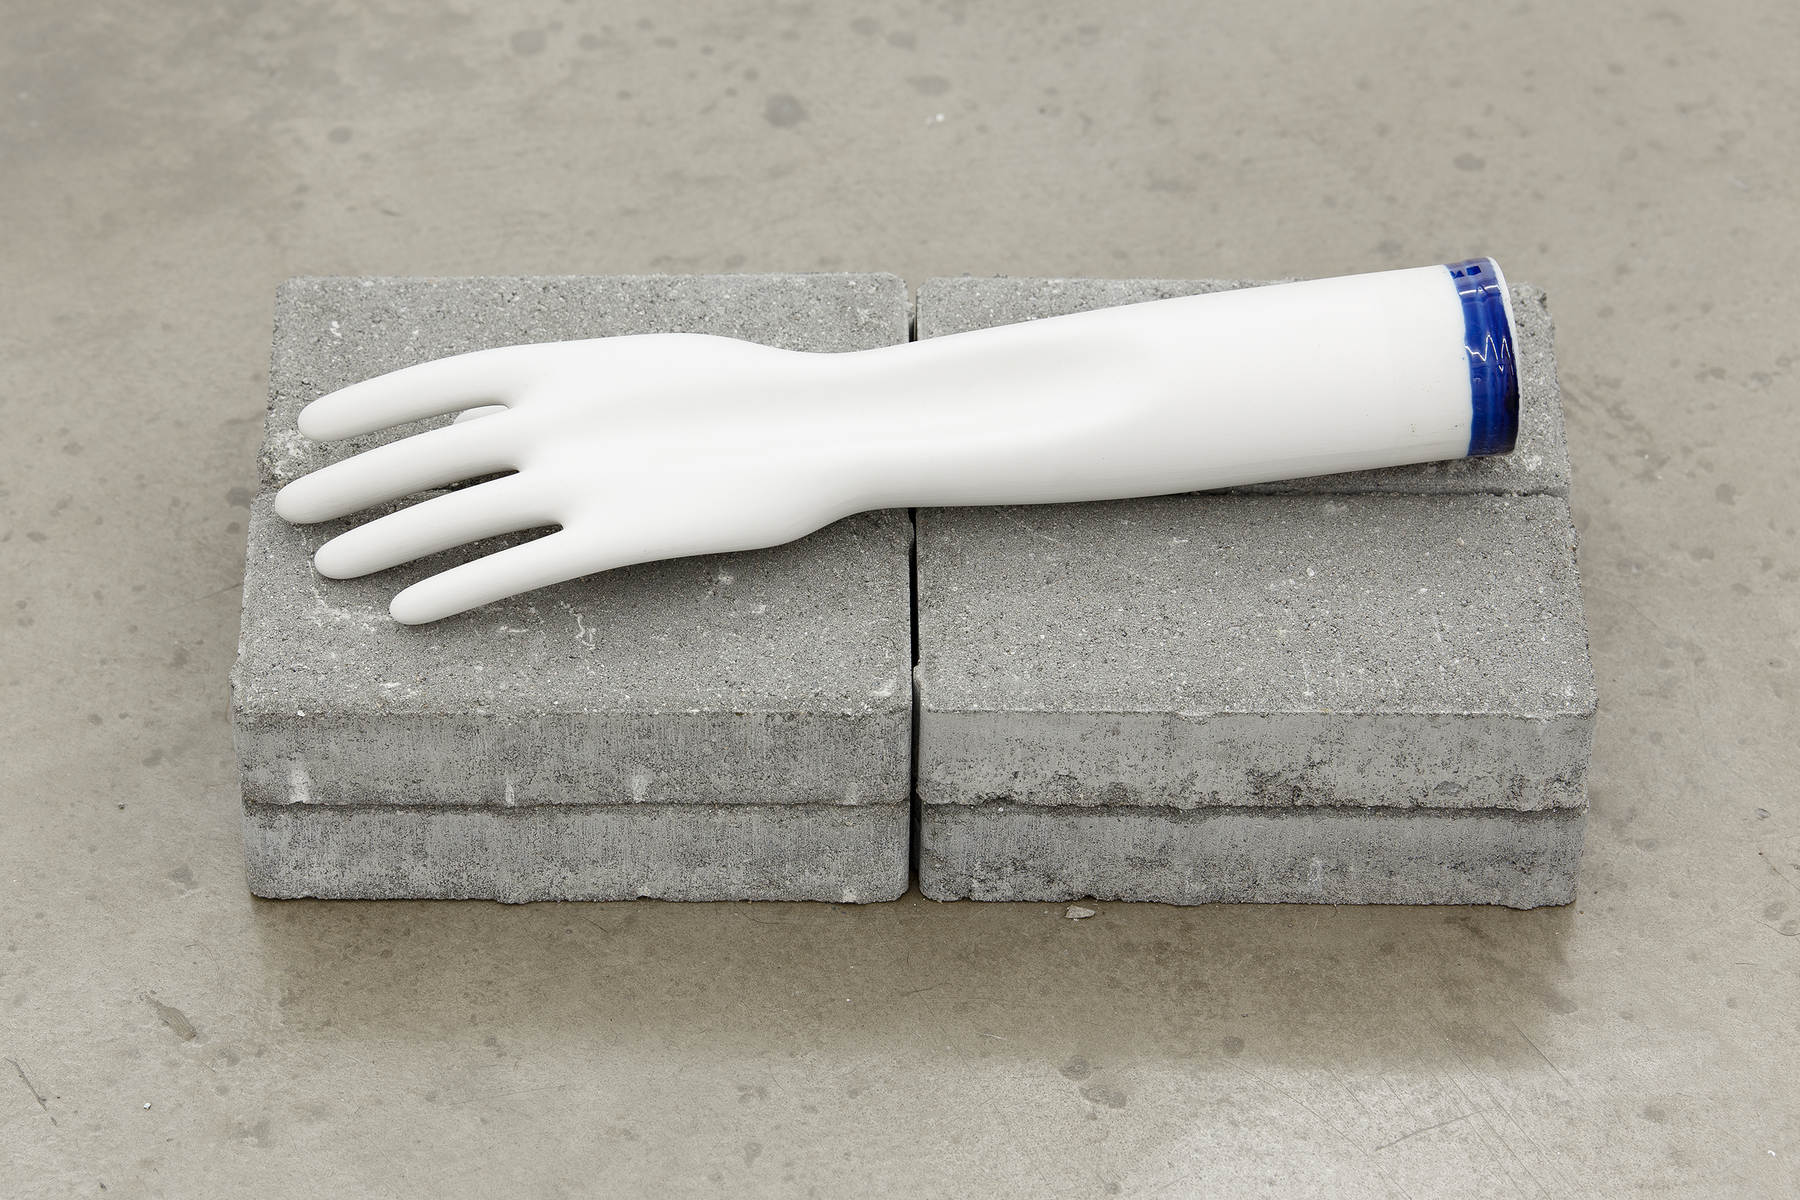 How it’s made, 2015, porcelain glove mold, 9 x 27 cm (1)